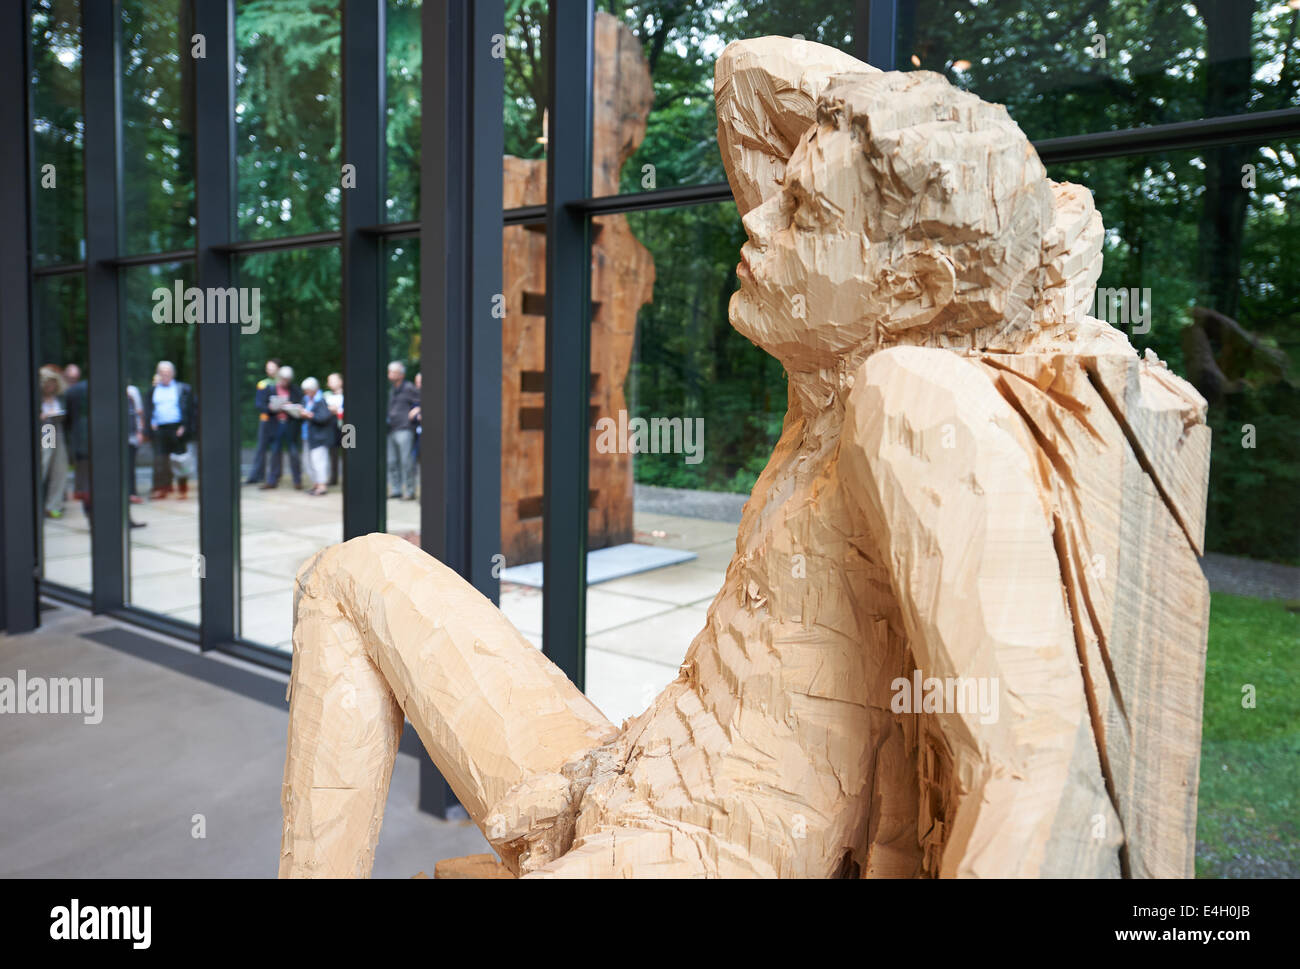 The wooden sculpture 'Satyr' by Stephan Balkenhol in the sculpture park in Wuppertal, Germany, 11 July 2014. Balkenhols' important works, who is a professor at the Karslruhe Art Academy, are on display until 12 October. Photo: BERND THISSEN/dpa Stock Photo